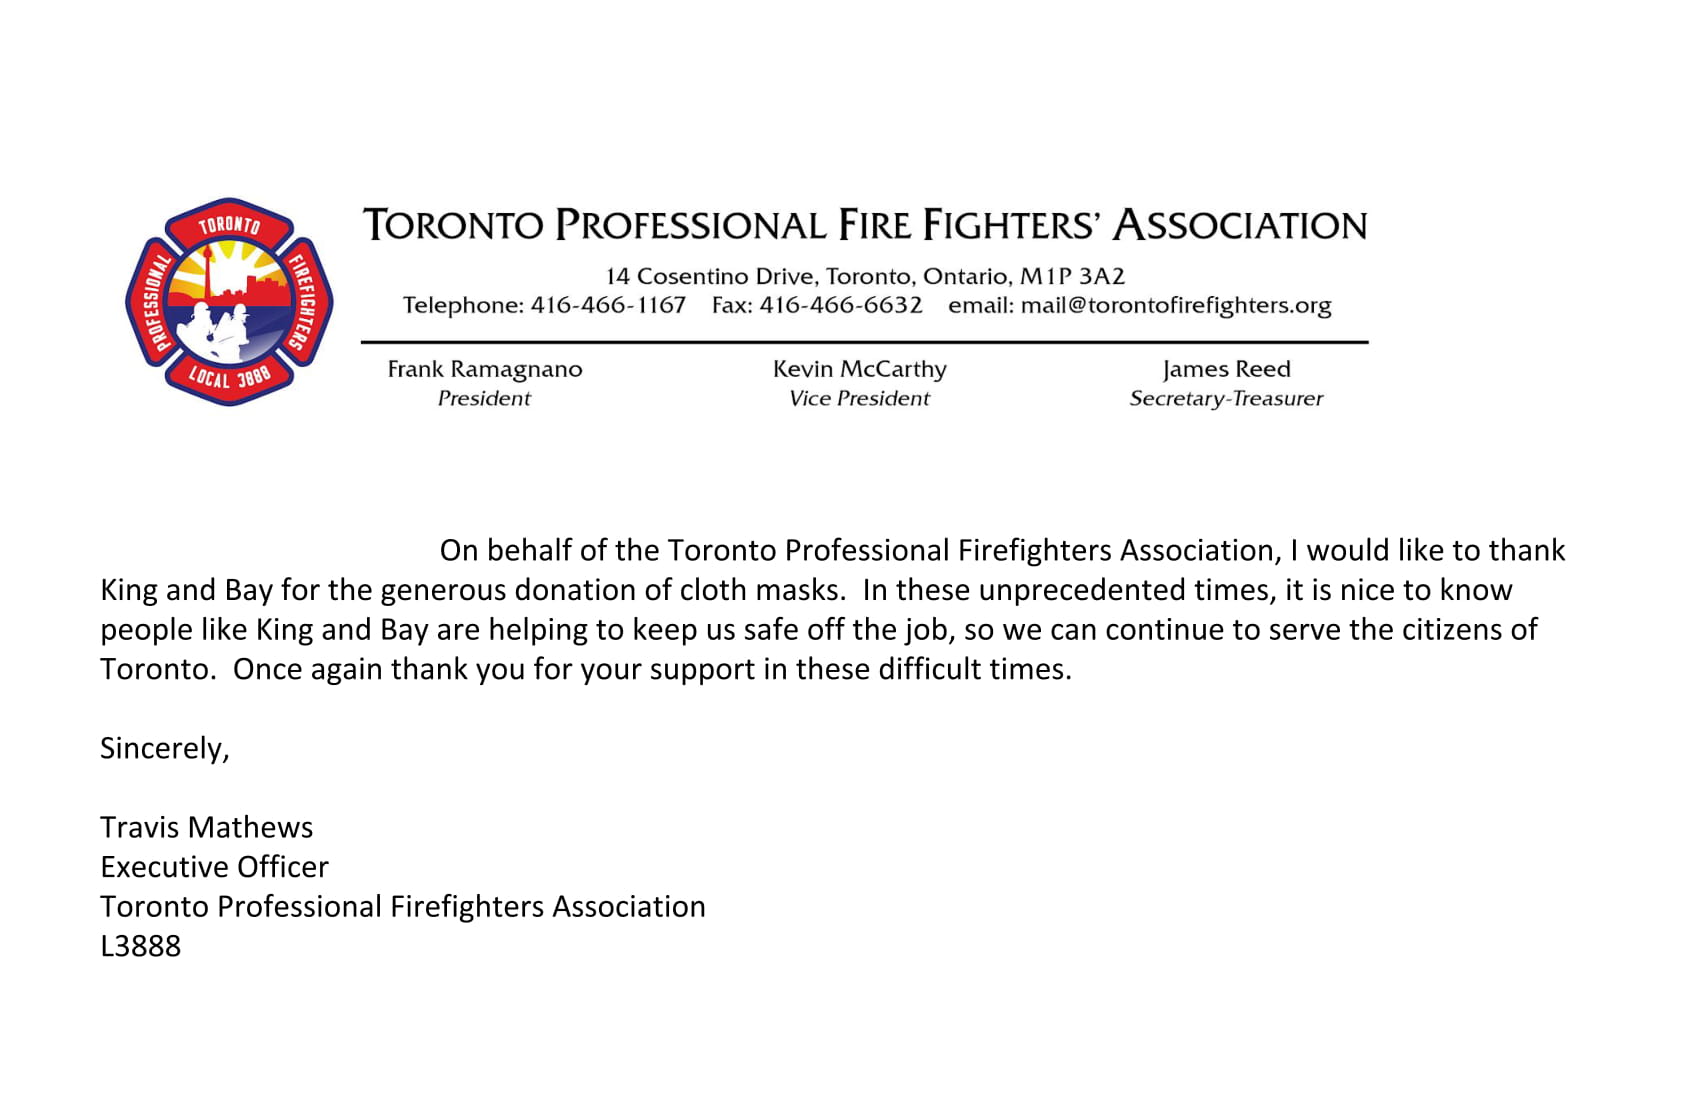 Toronto Professional Fire Fighters' Association thanks King & Bay for Mission2Mask donation